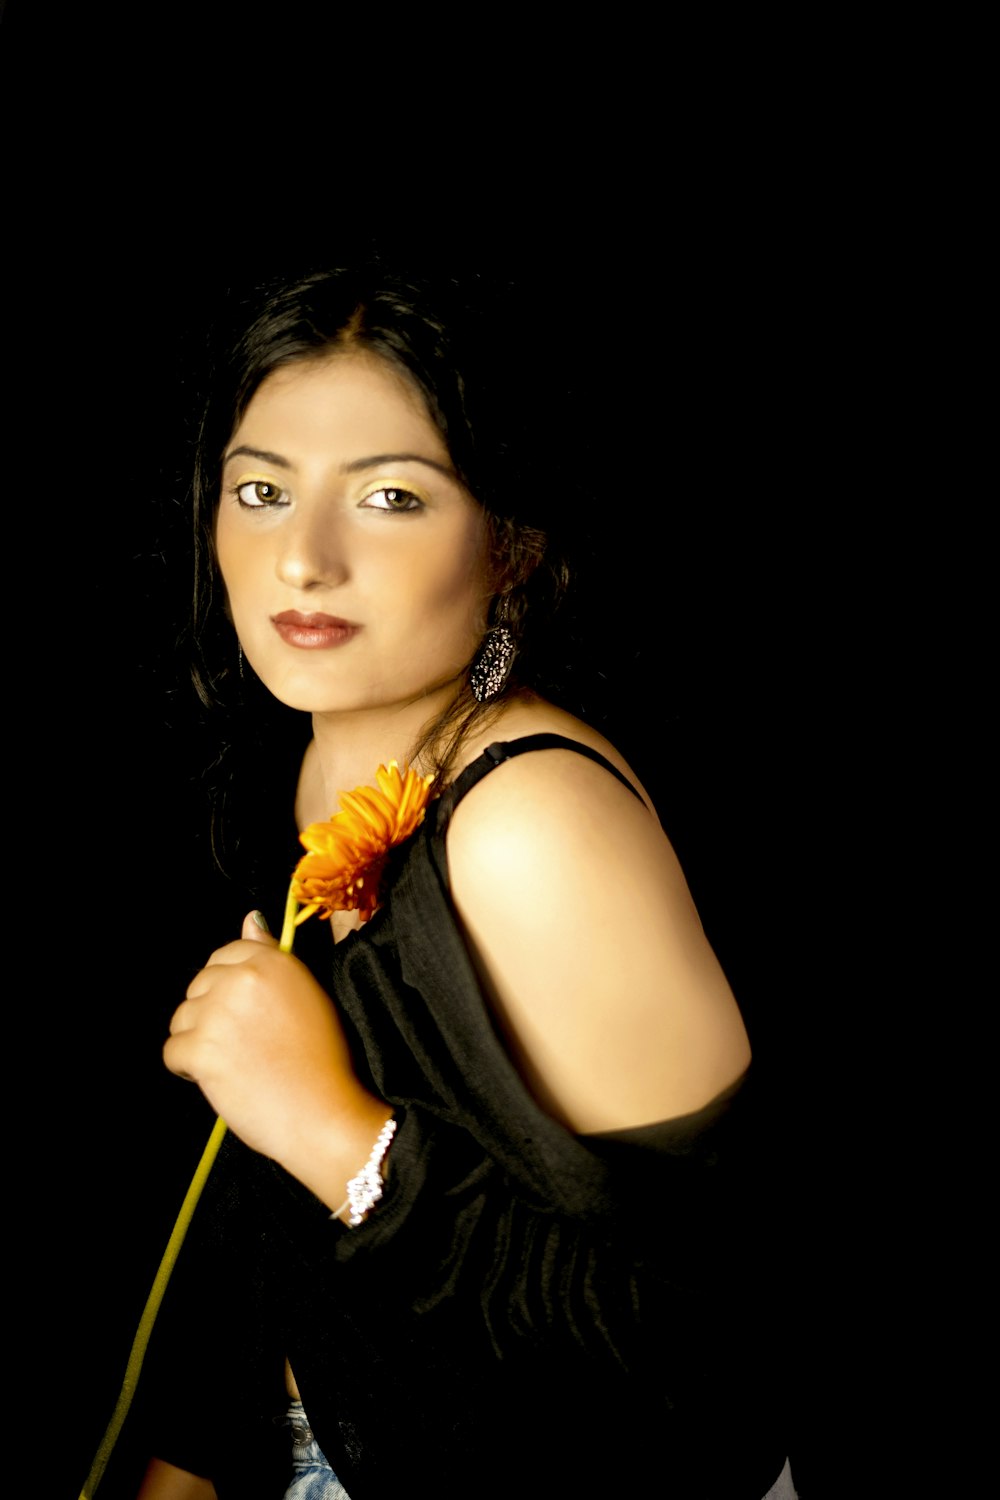 woman in black sleeveless top holding yellow flower